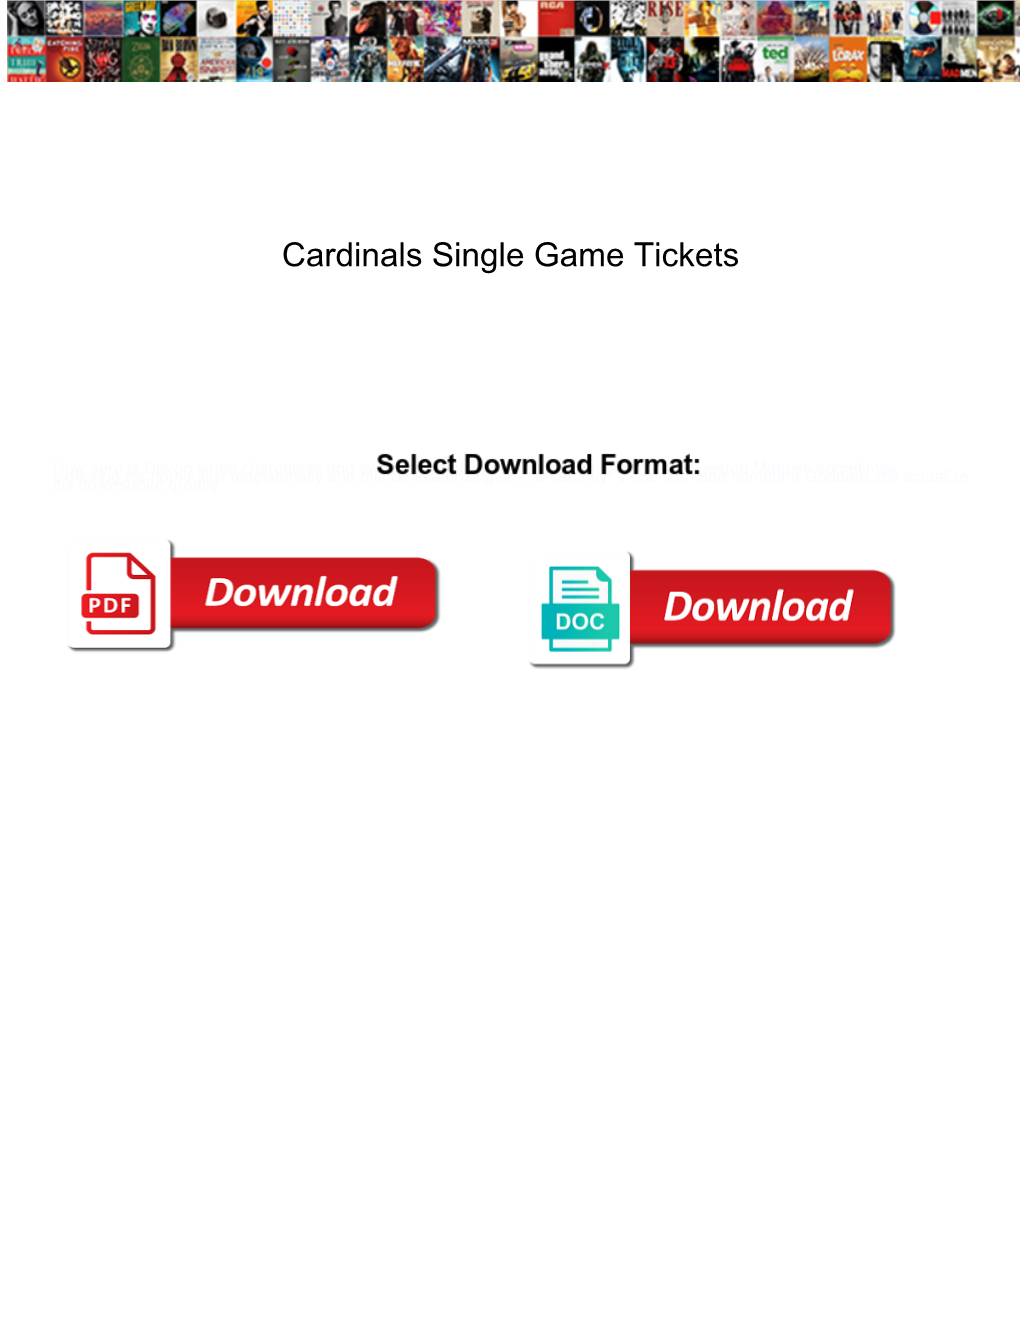 Cardinals Single Game Tickets Examples